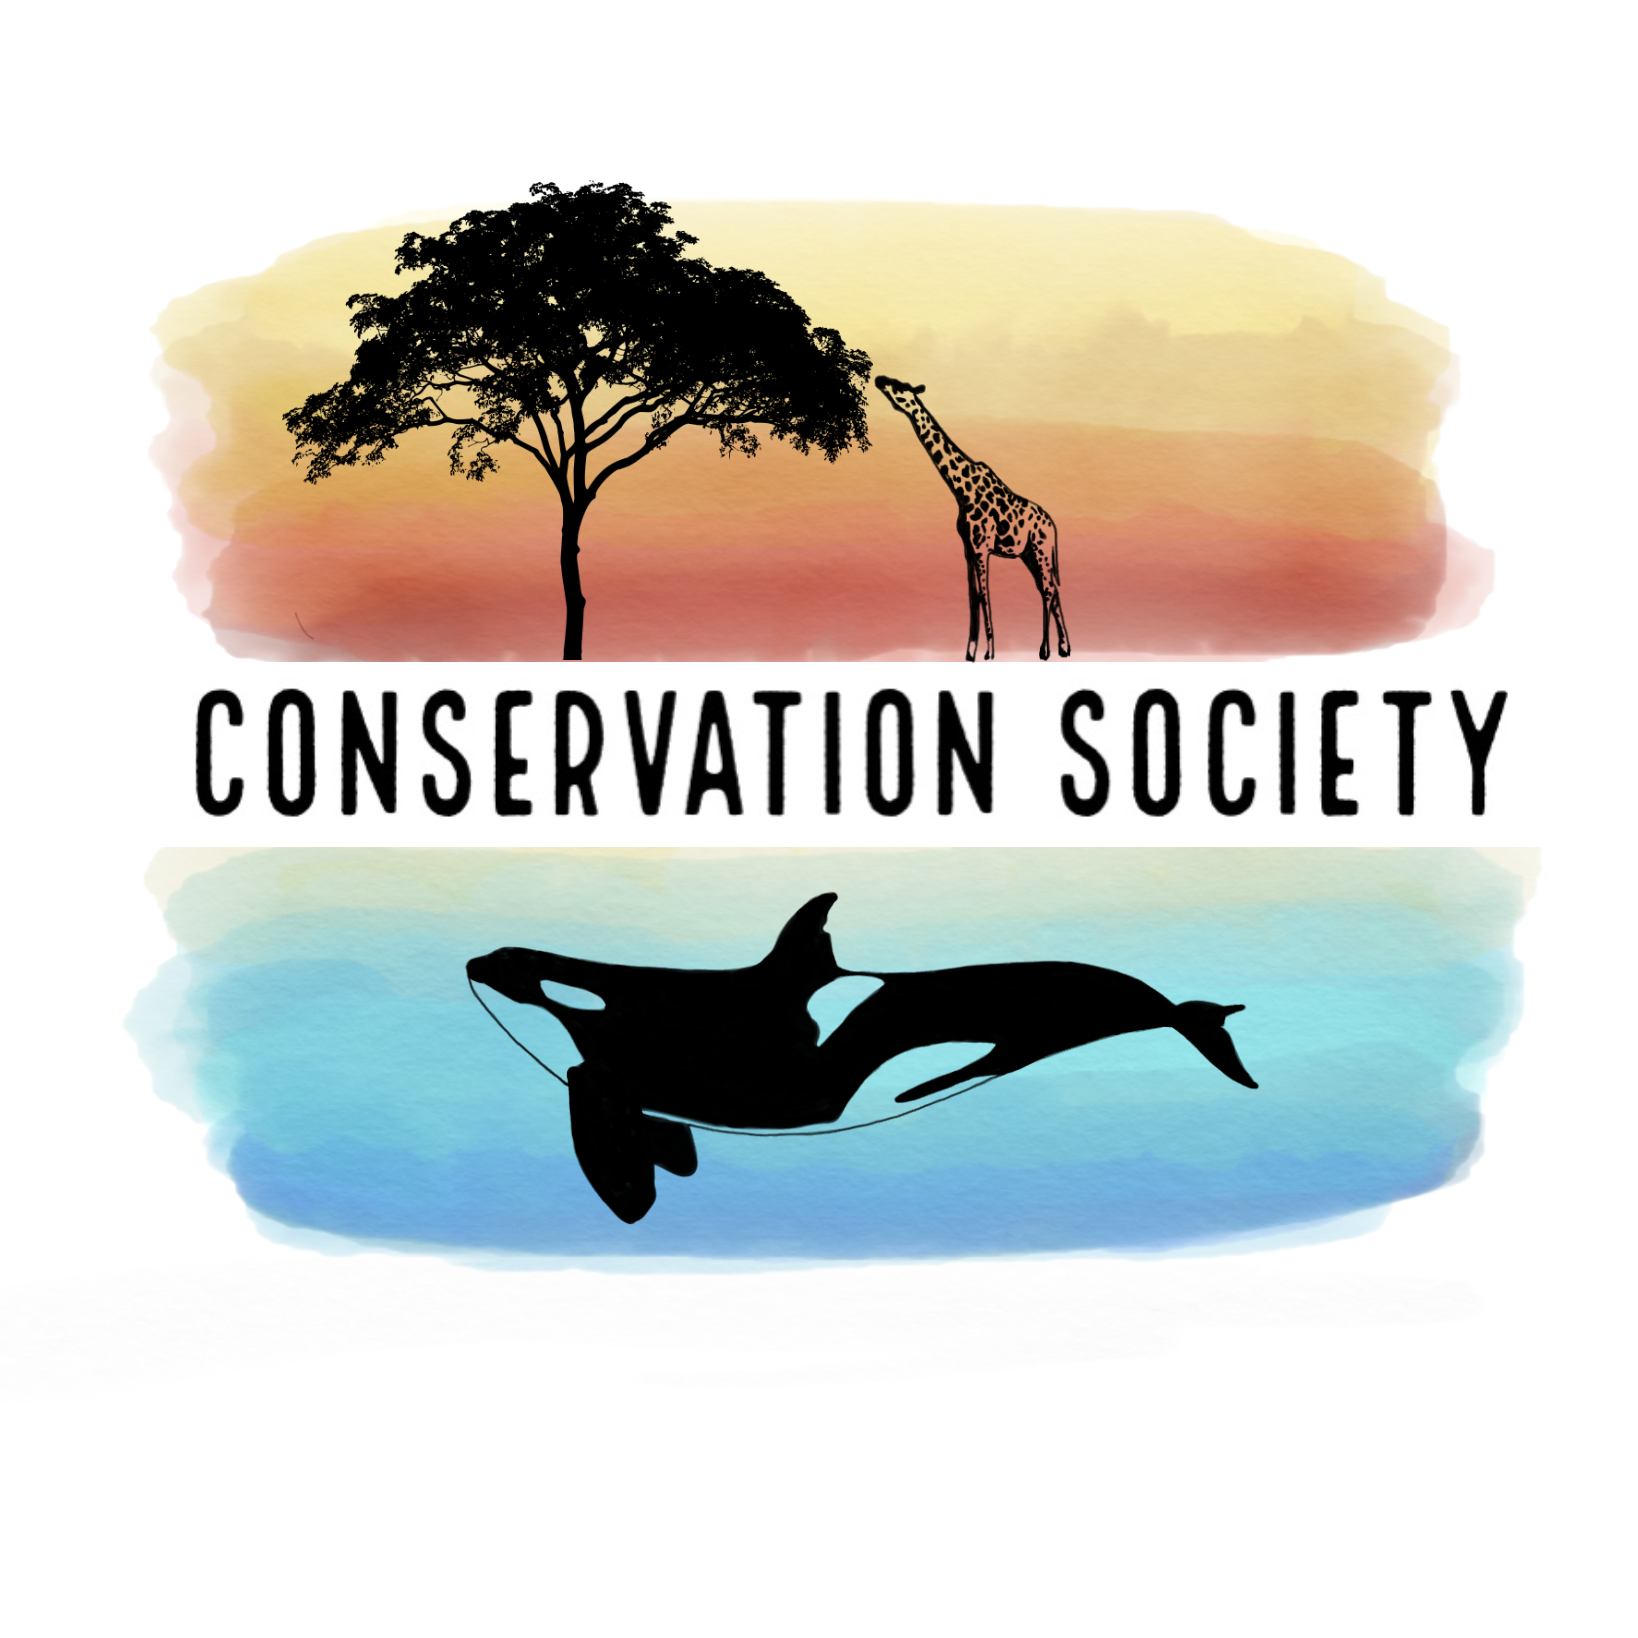 The new society logo shows a giraffe feeding at a tree and a killer whale